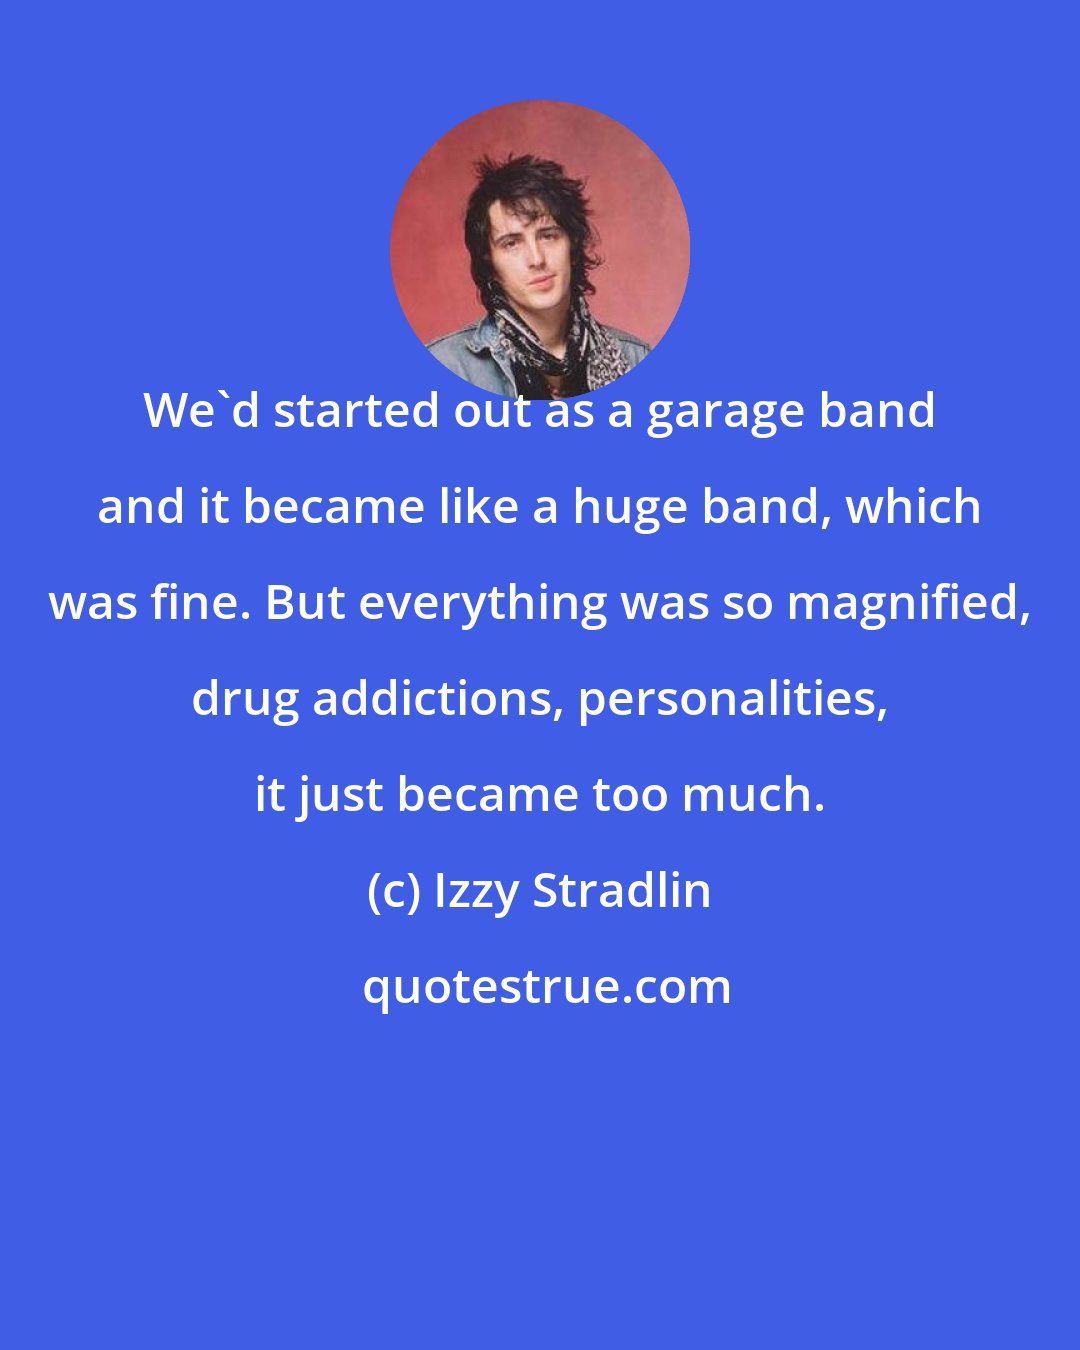 Izzy Stradlin: We'd started out as a garage band and it became like a huge band, which was fine. But everything was so magnified, drug addictions, personalities, it just became too much.